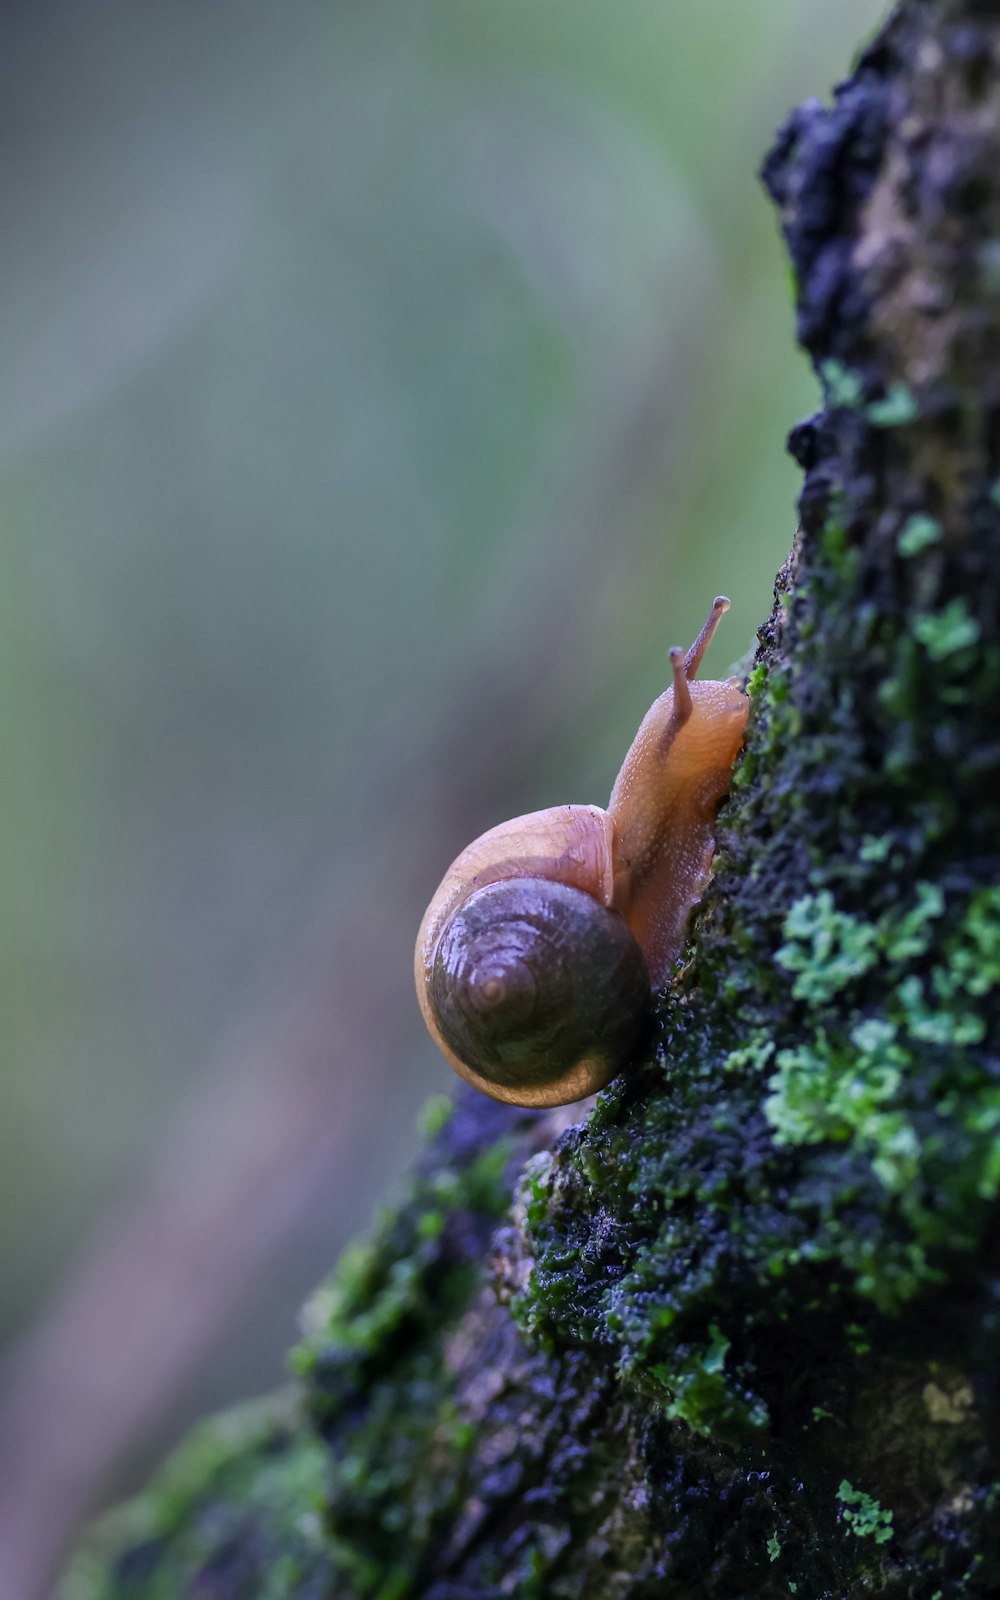 a snail crawling on a mossy tree branch